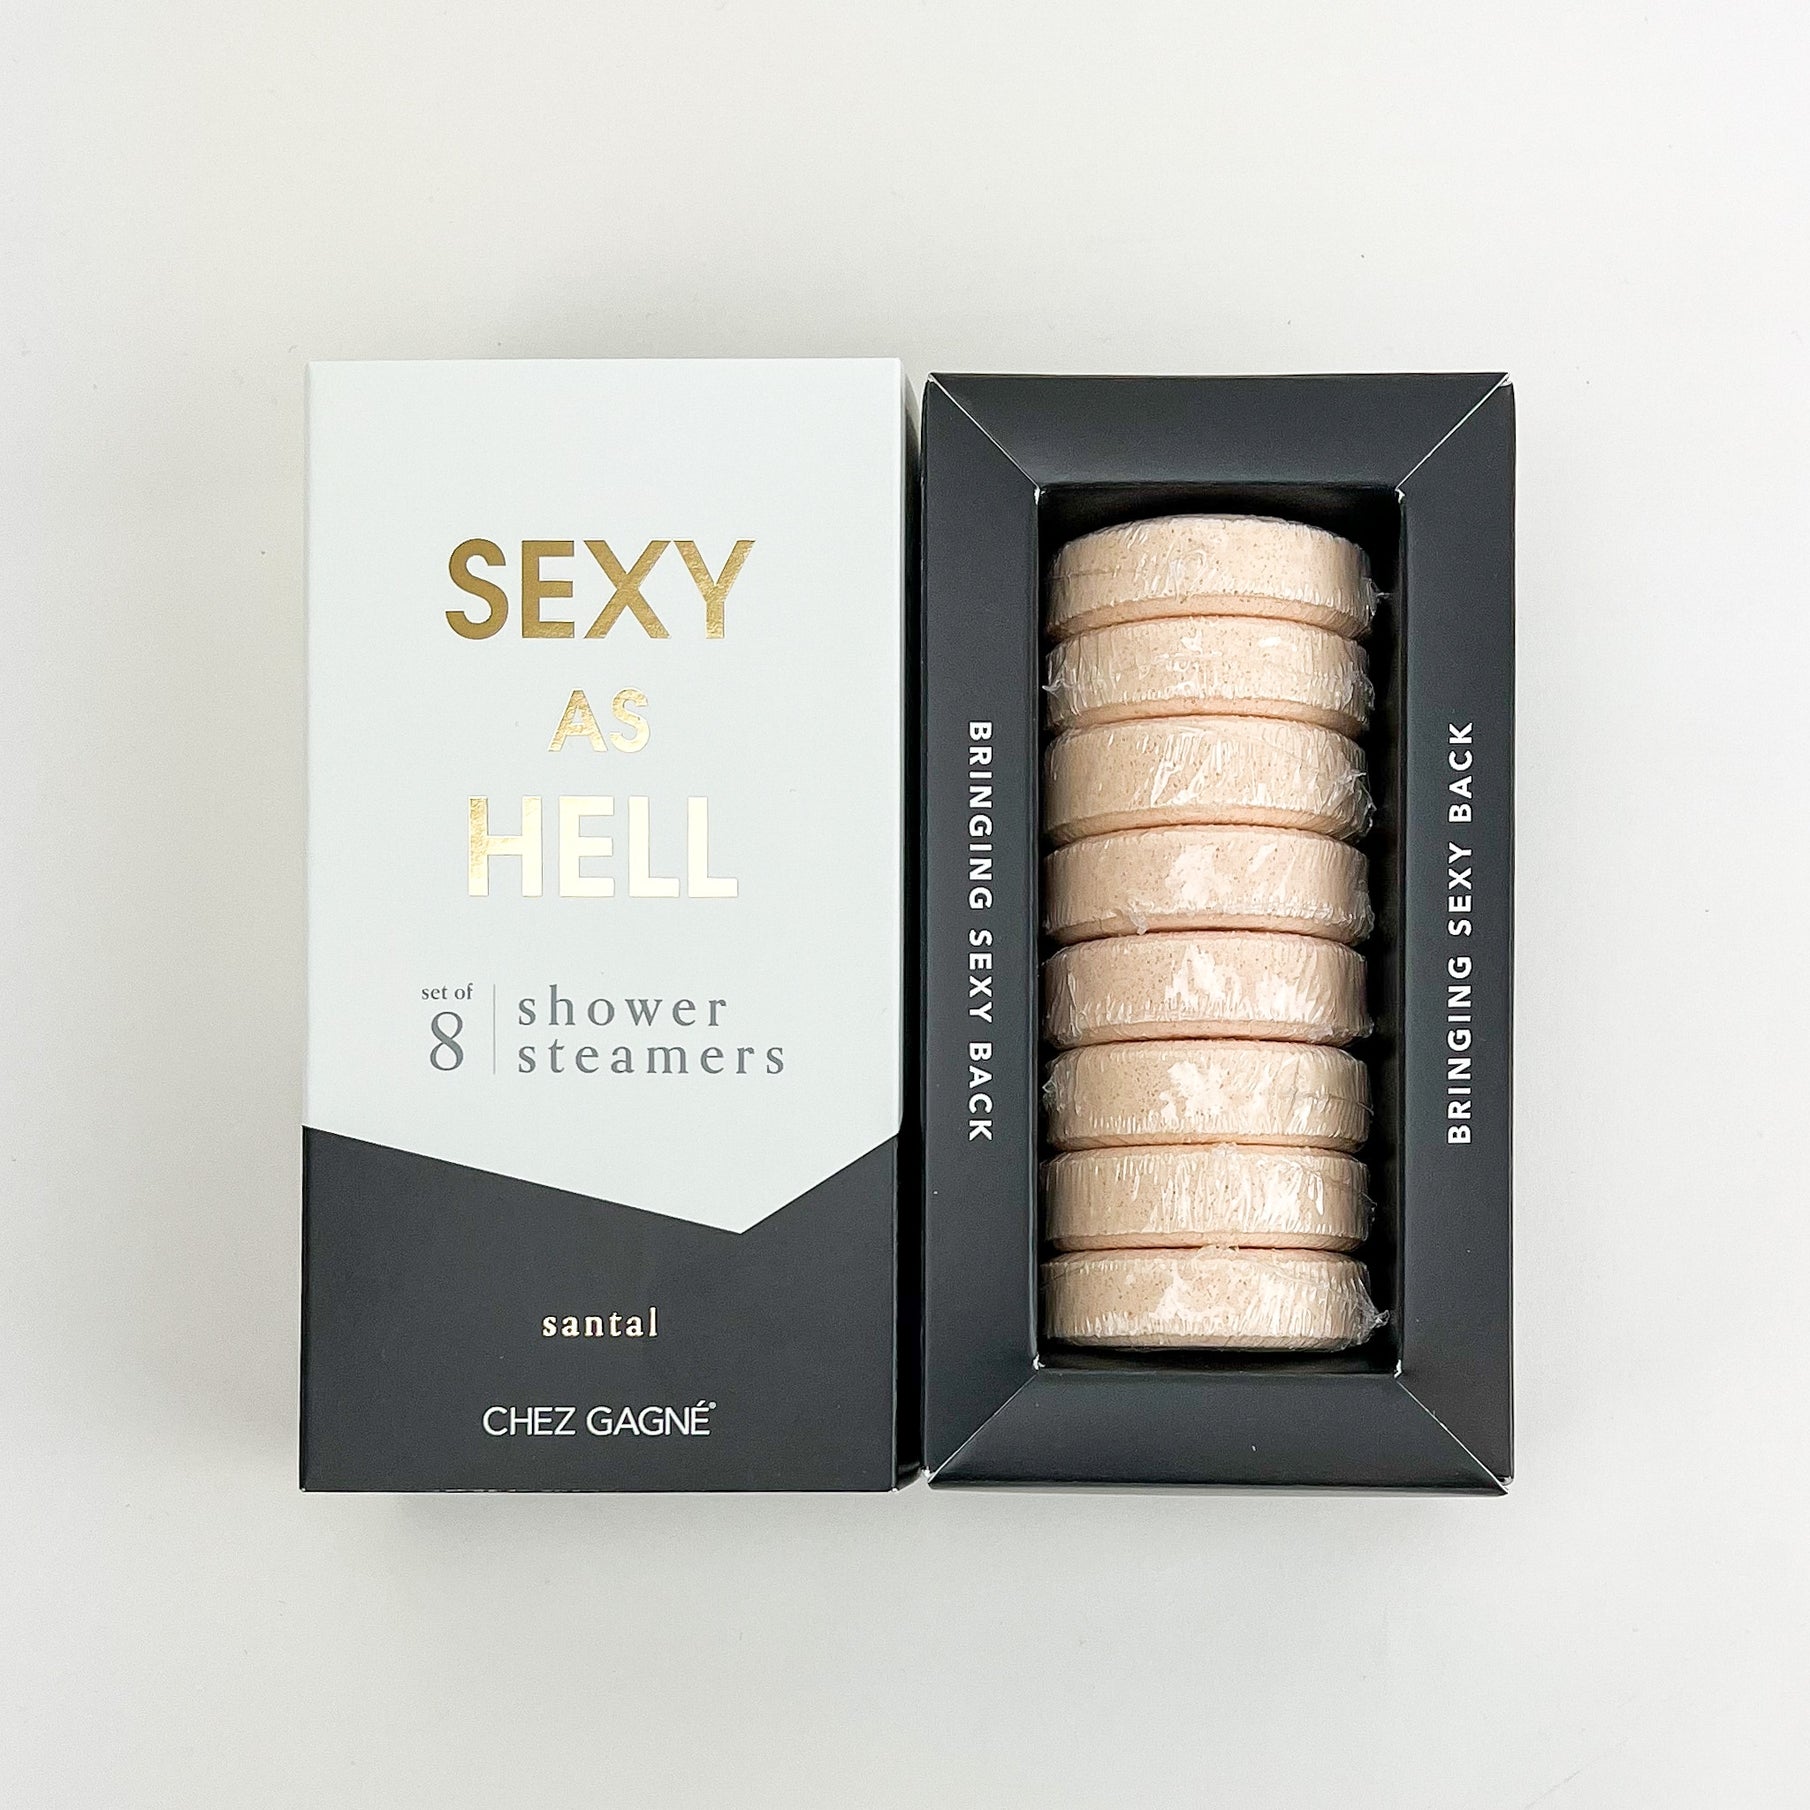 Chez Gagné Shower Steamers - Sexy As Hell